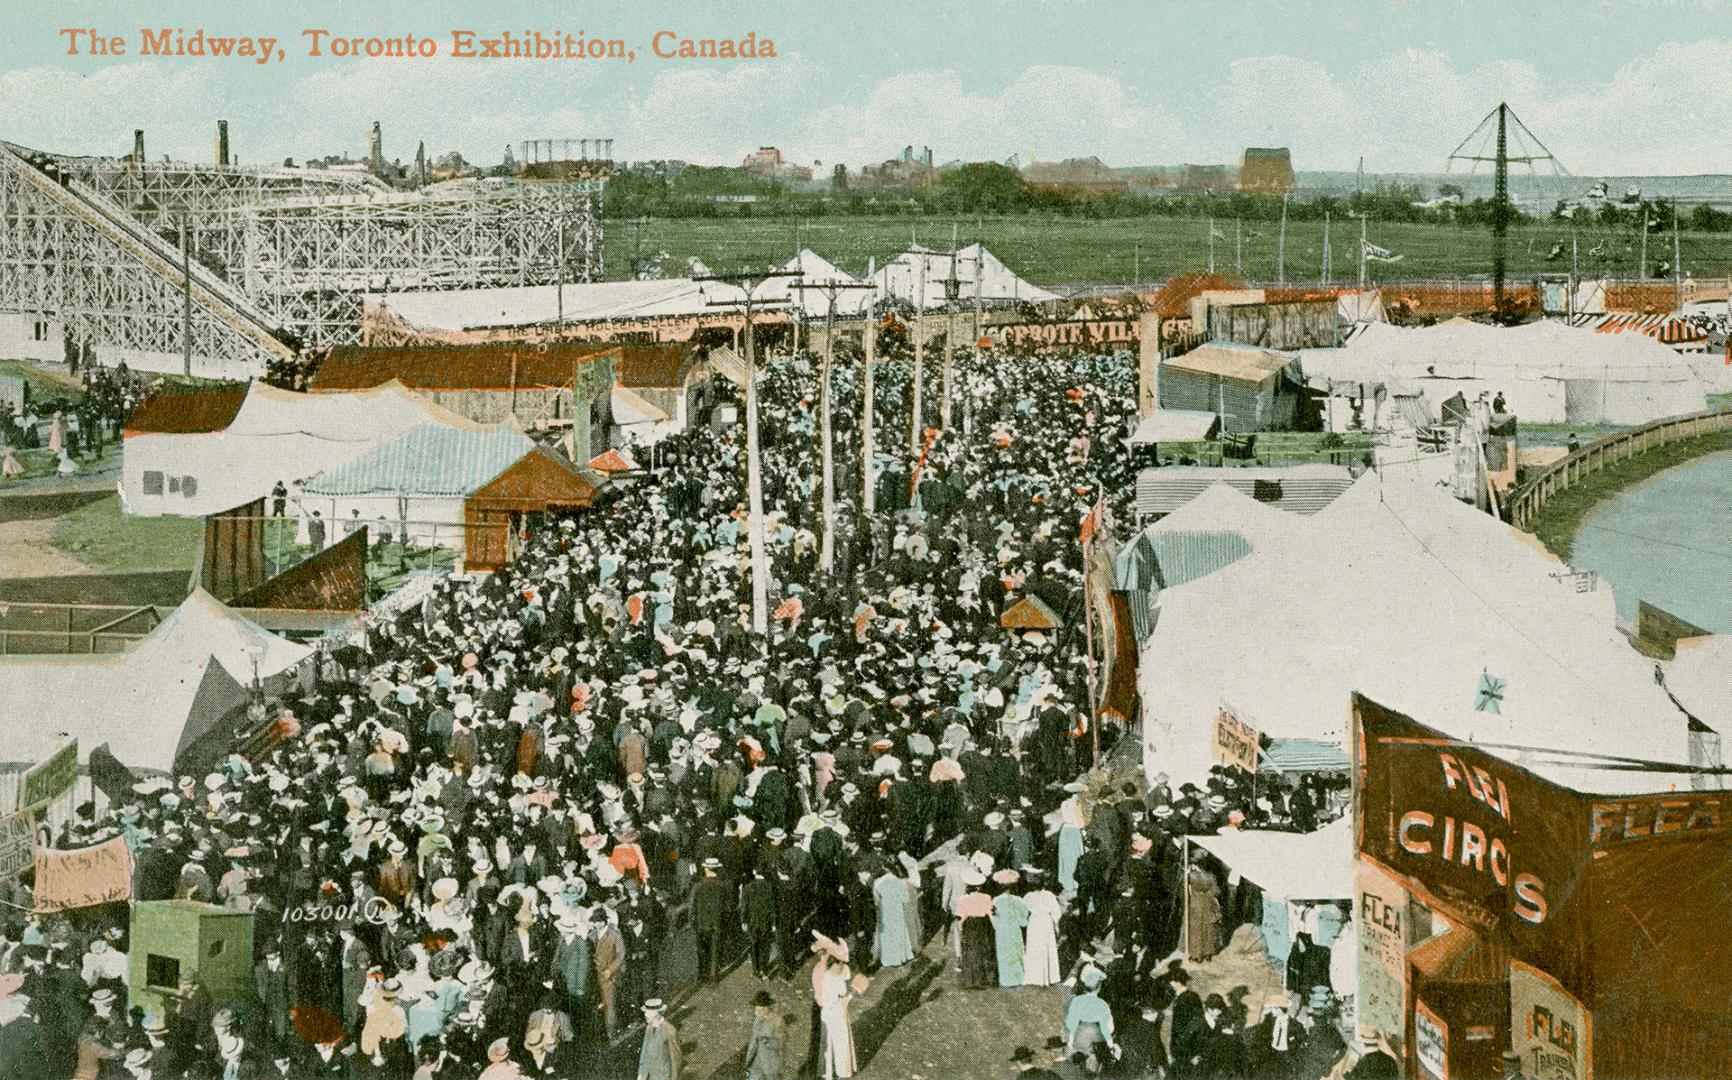 The Midway, Toronto Exhibition, Canada